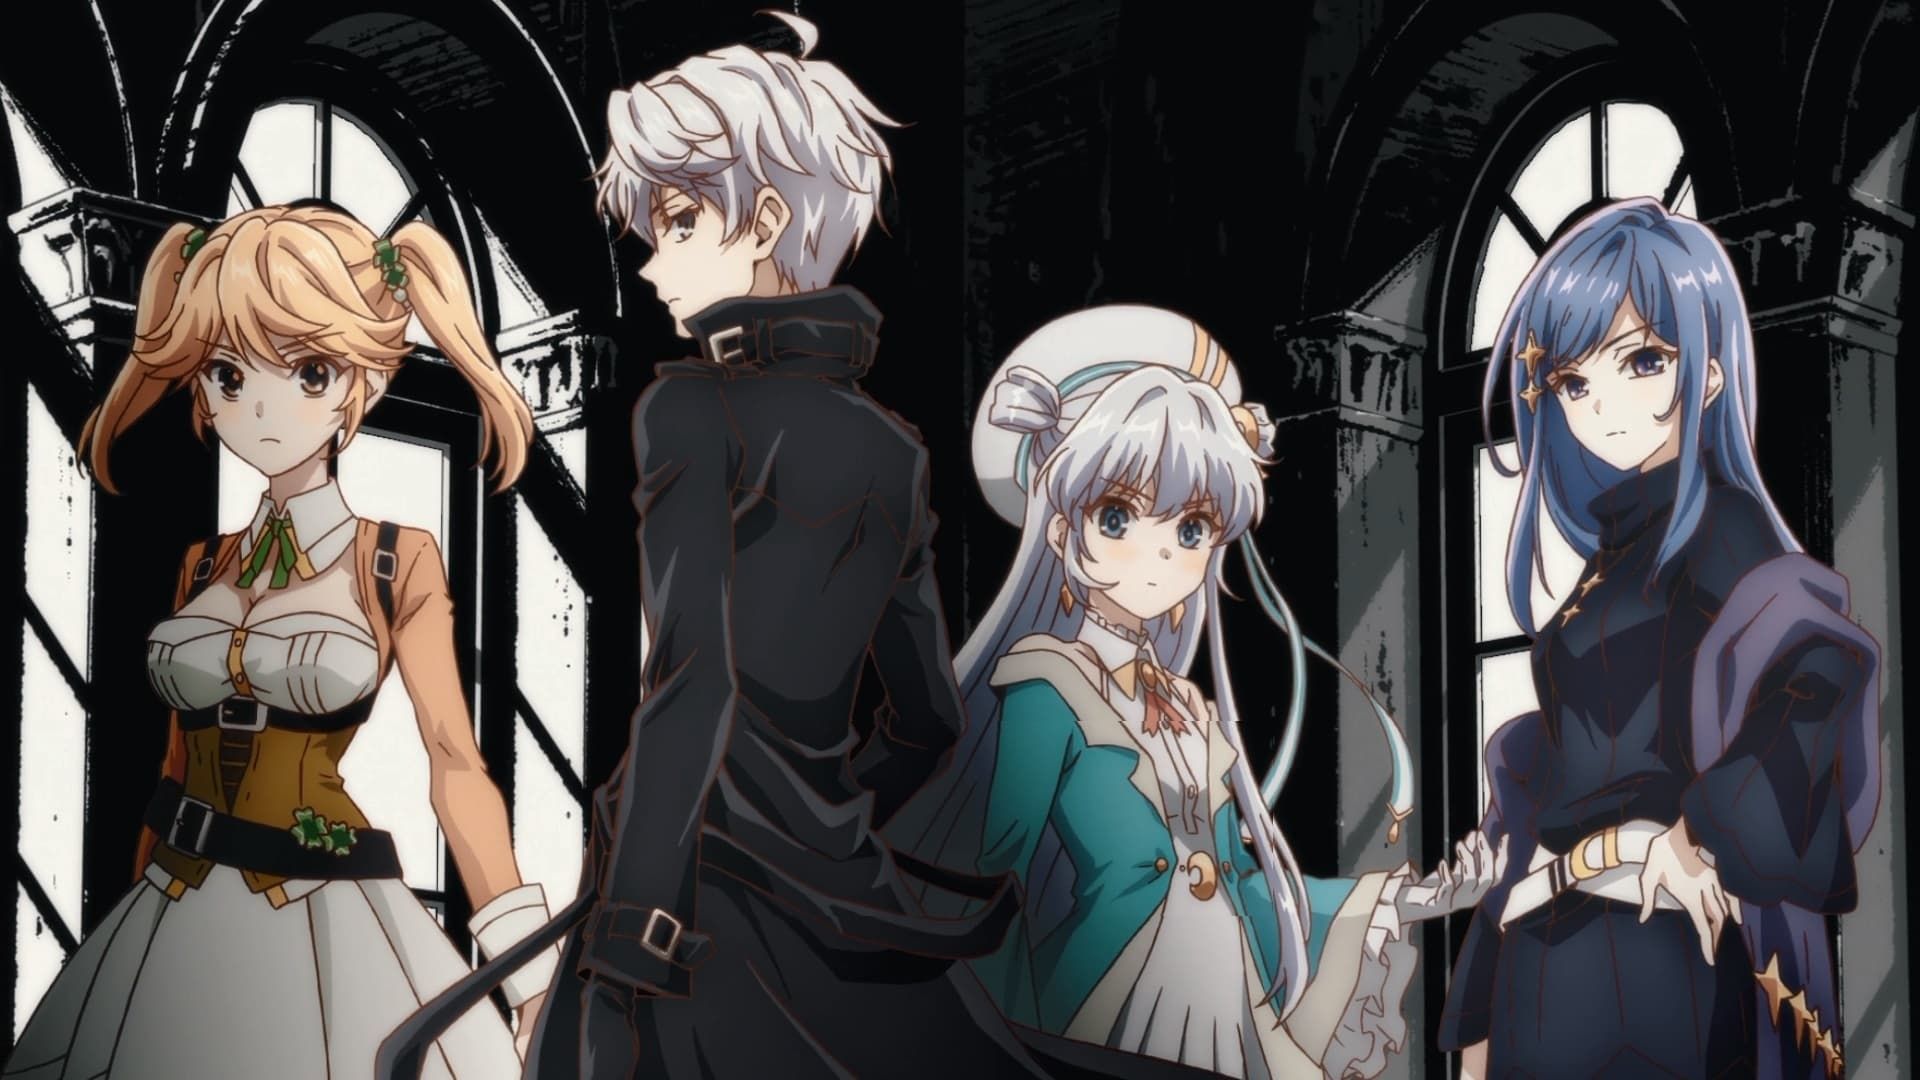 Anime Hajime Review: The World's Finest Assassin Gets Reincarnated in Another  World as an Aristocrat - Anime Hajime